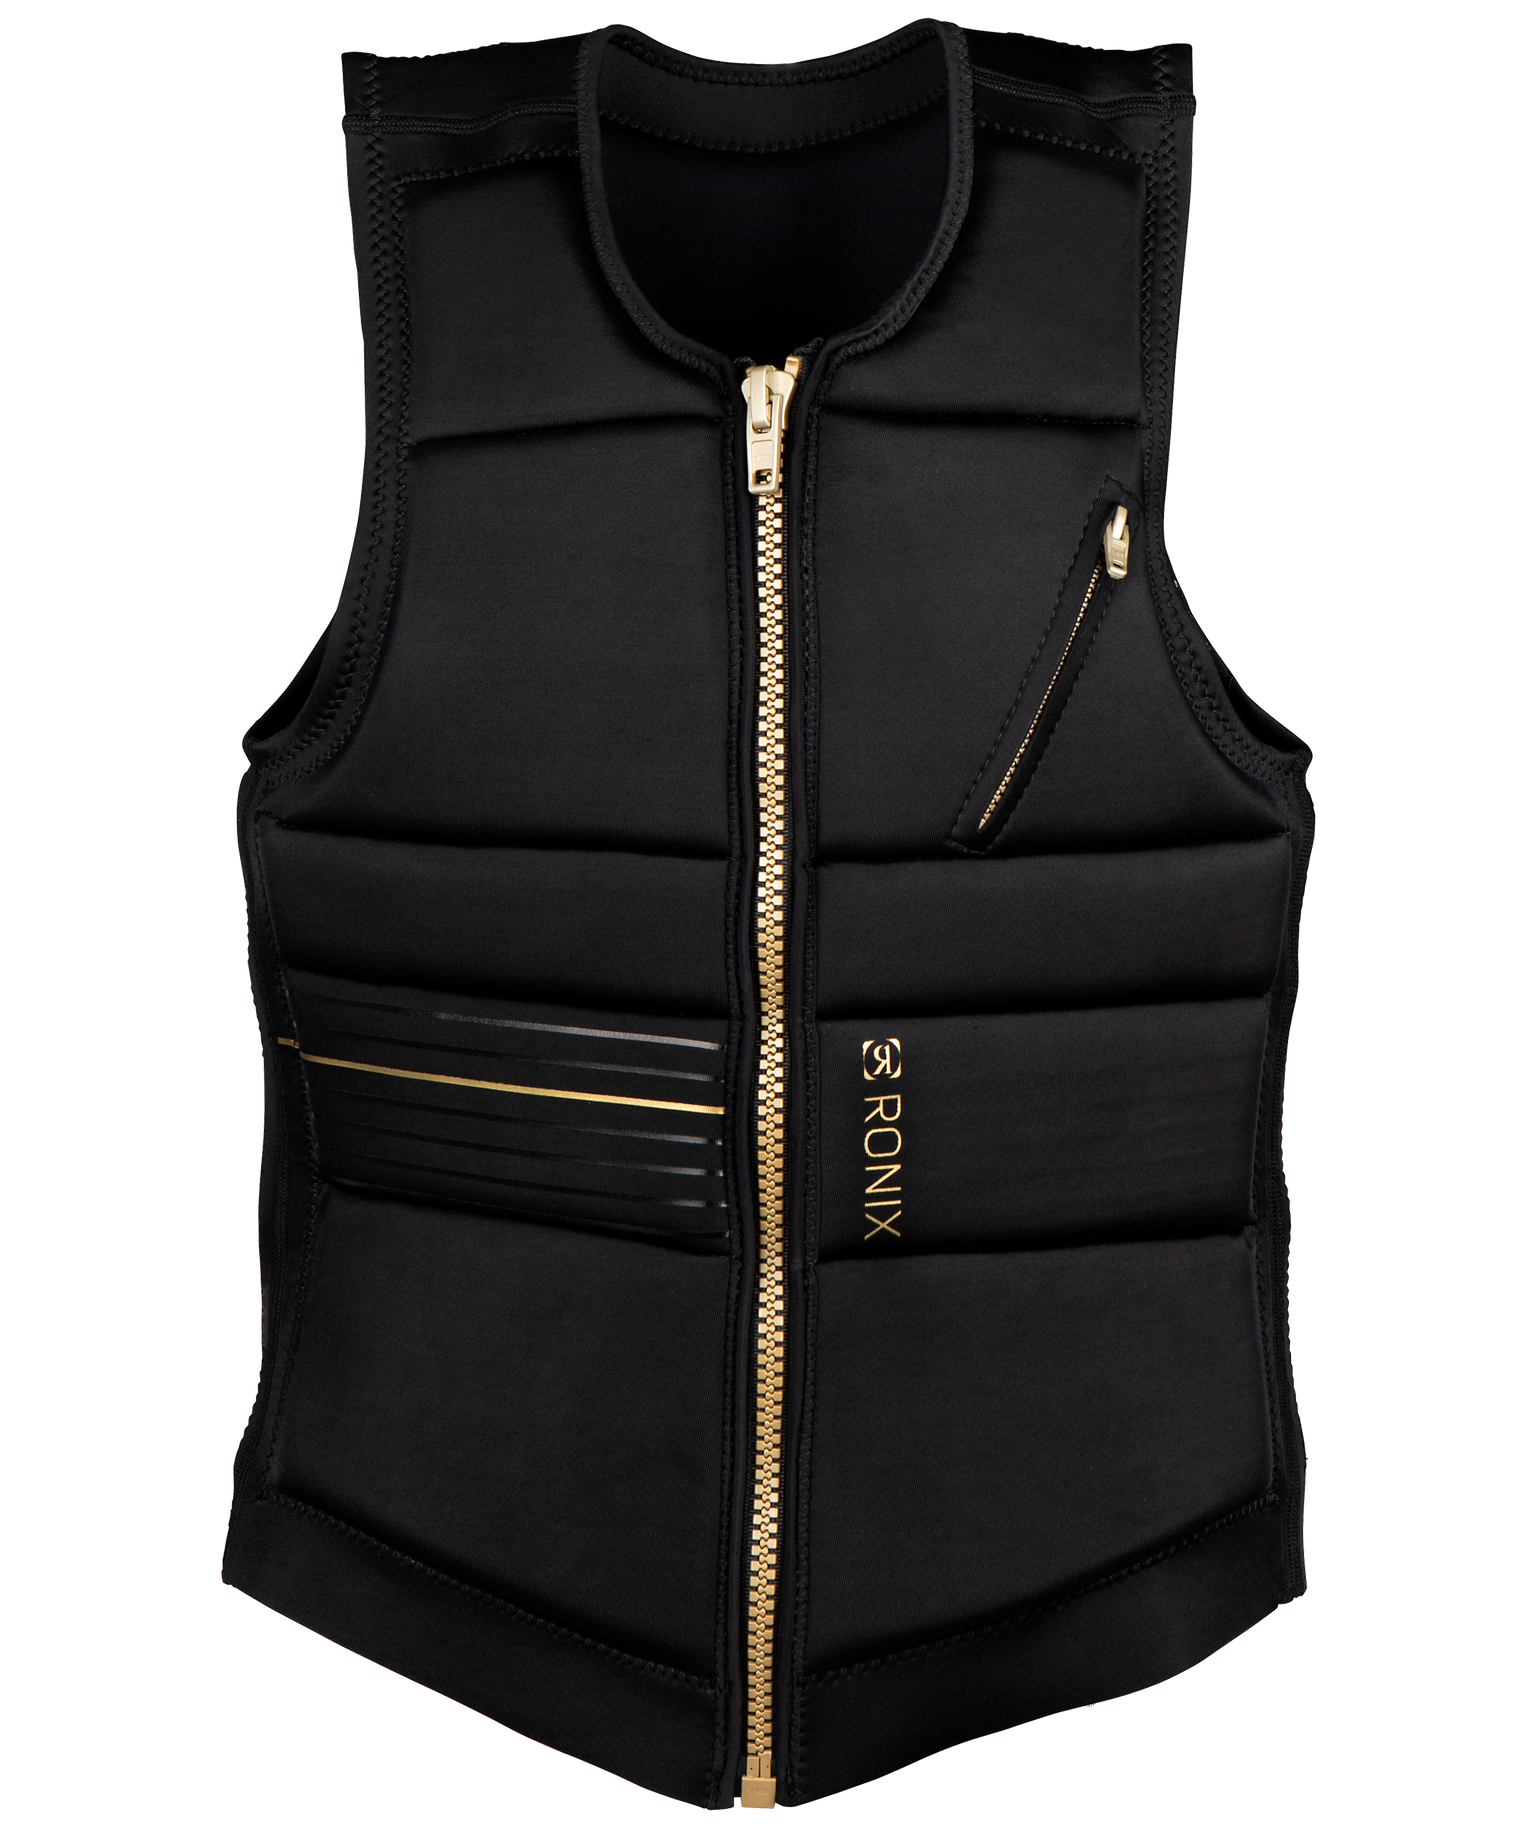 A Ronix 2024 Rise Women's CE Impact Vest is a lightweight impact vest designed with flex foam for ultimate comfort and protection.